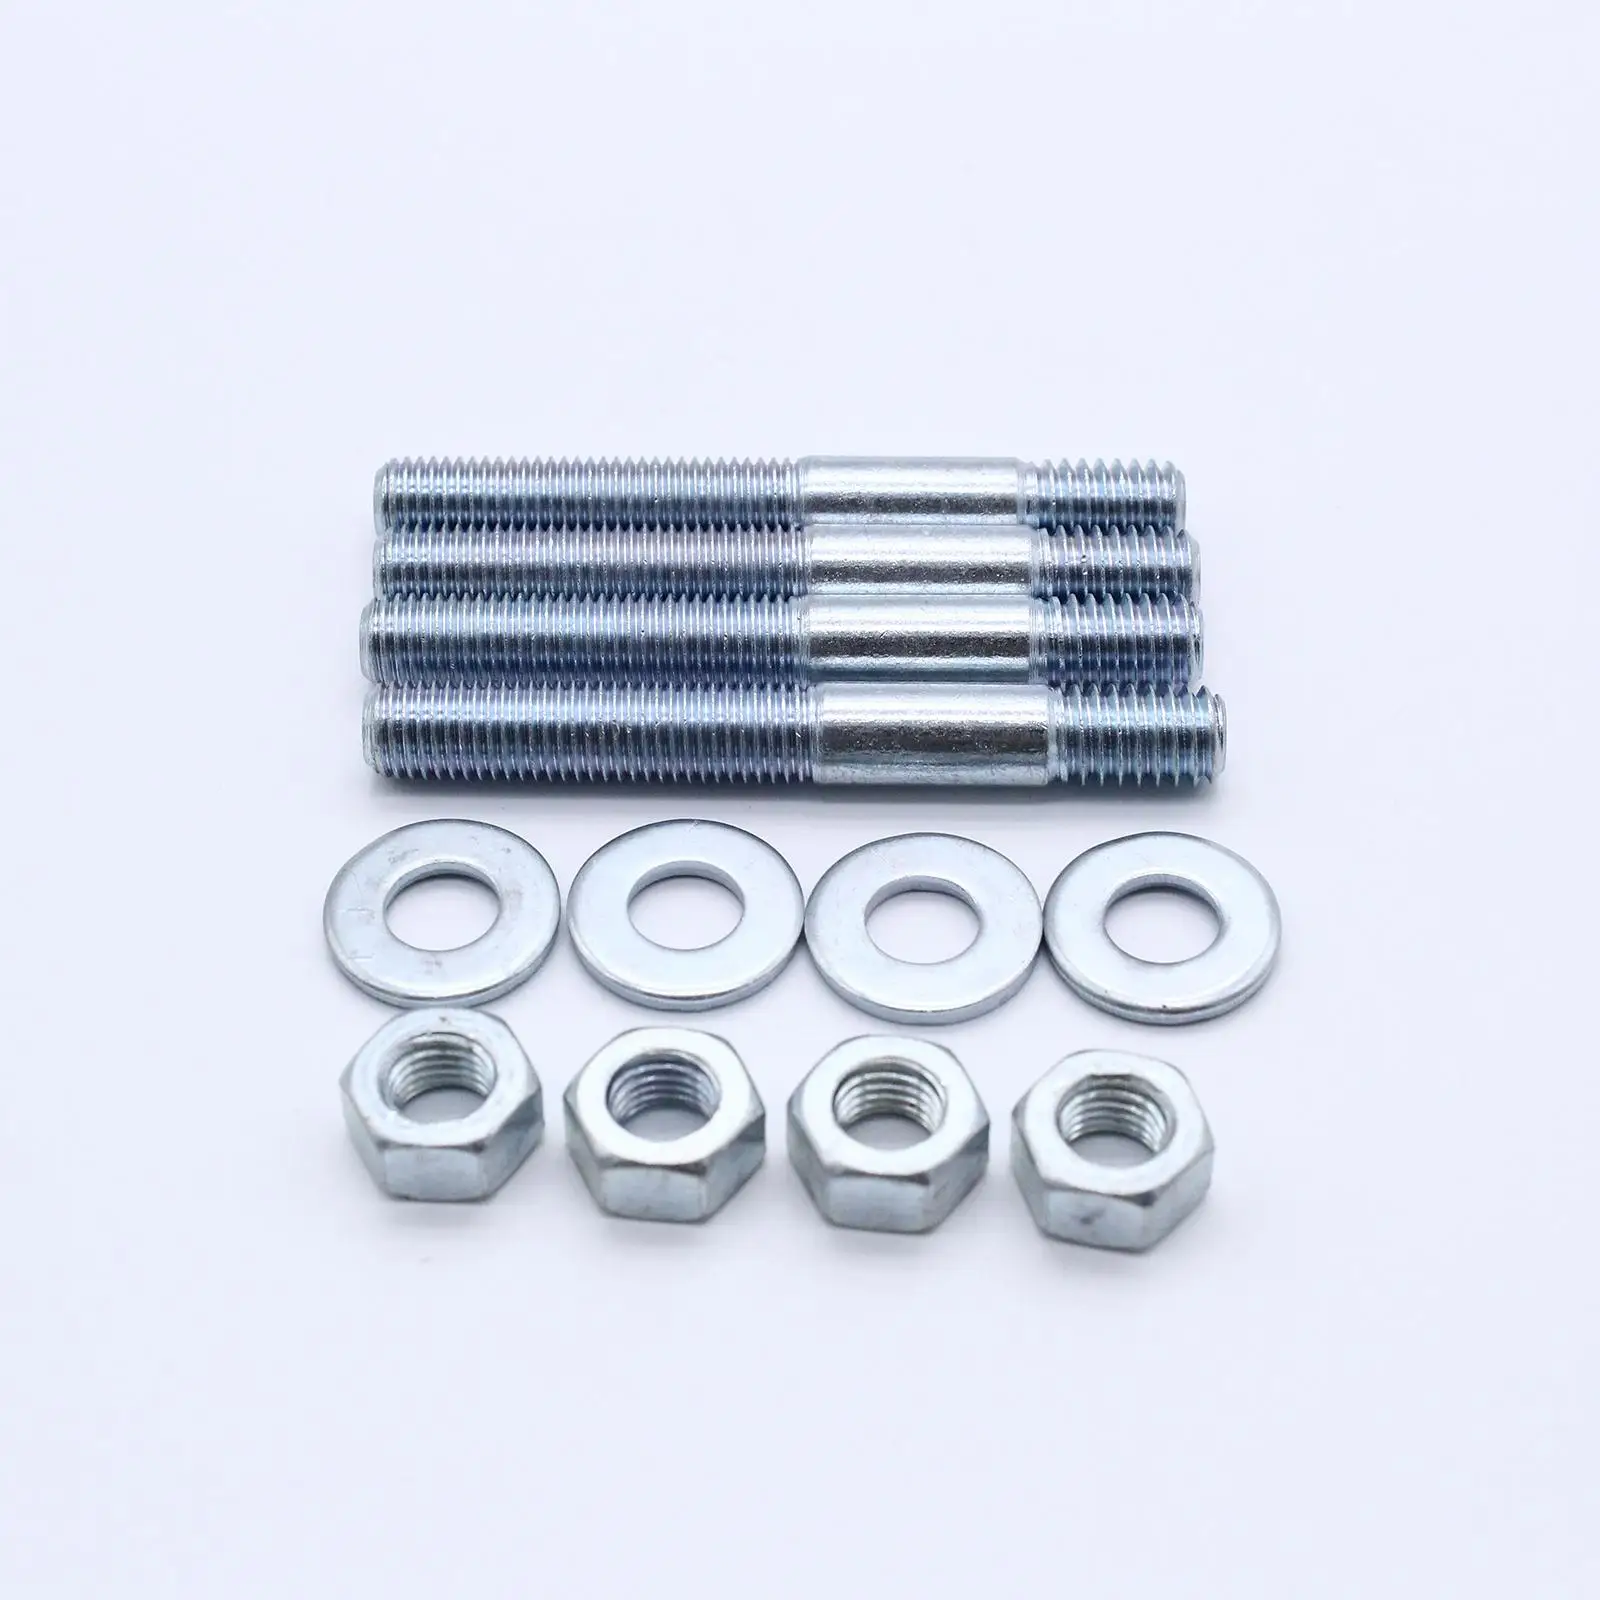 4 Pieces Carburetor Studs Set 5/16in x 2-1/2in Replaces Bolts Nuts Iron Washers Parts